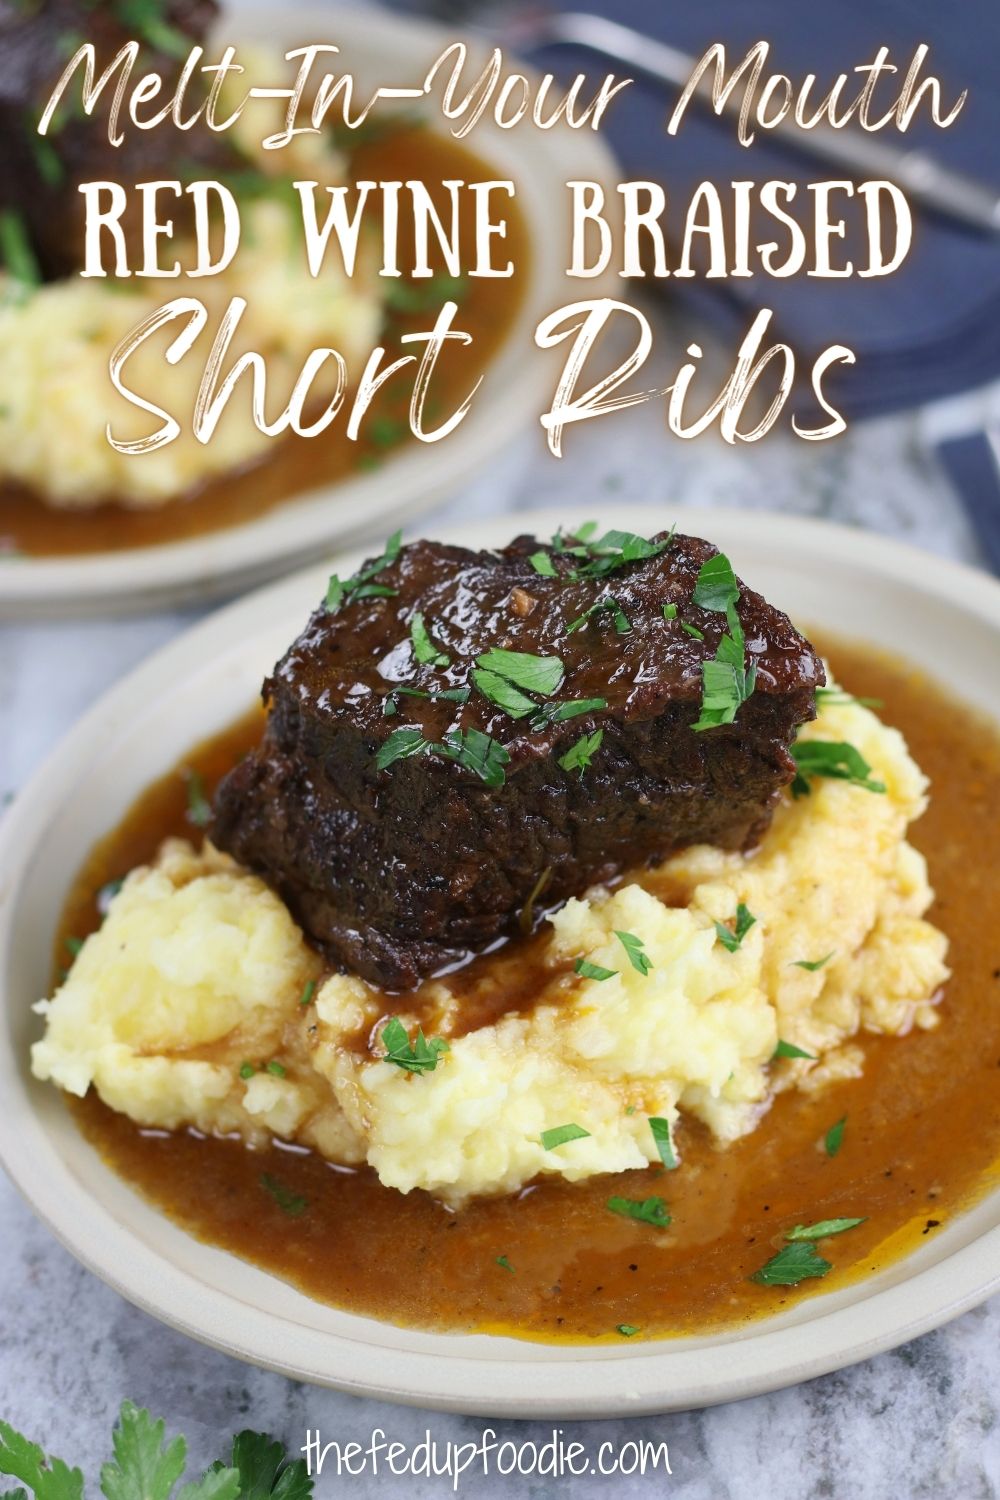 Red wine braised short ribs have melt-in-your-mouth tender beef with a rich red wine sauce. This hearty, savory, and indulgent dish is perfect companion for mashed potatoes, creamy polenta or butter noodles. 
#RedWineBraisedShortRibs #RedWineBraisedBeef #RedWineBraisedShortRibsDutchOven #RedWineBraisedShortRibsRecipe #BestRedWineBraisedShortRibs